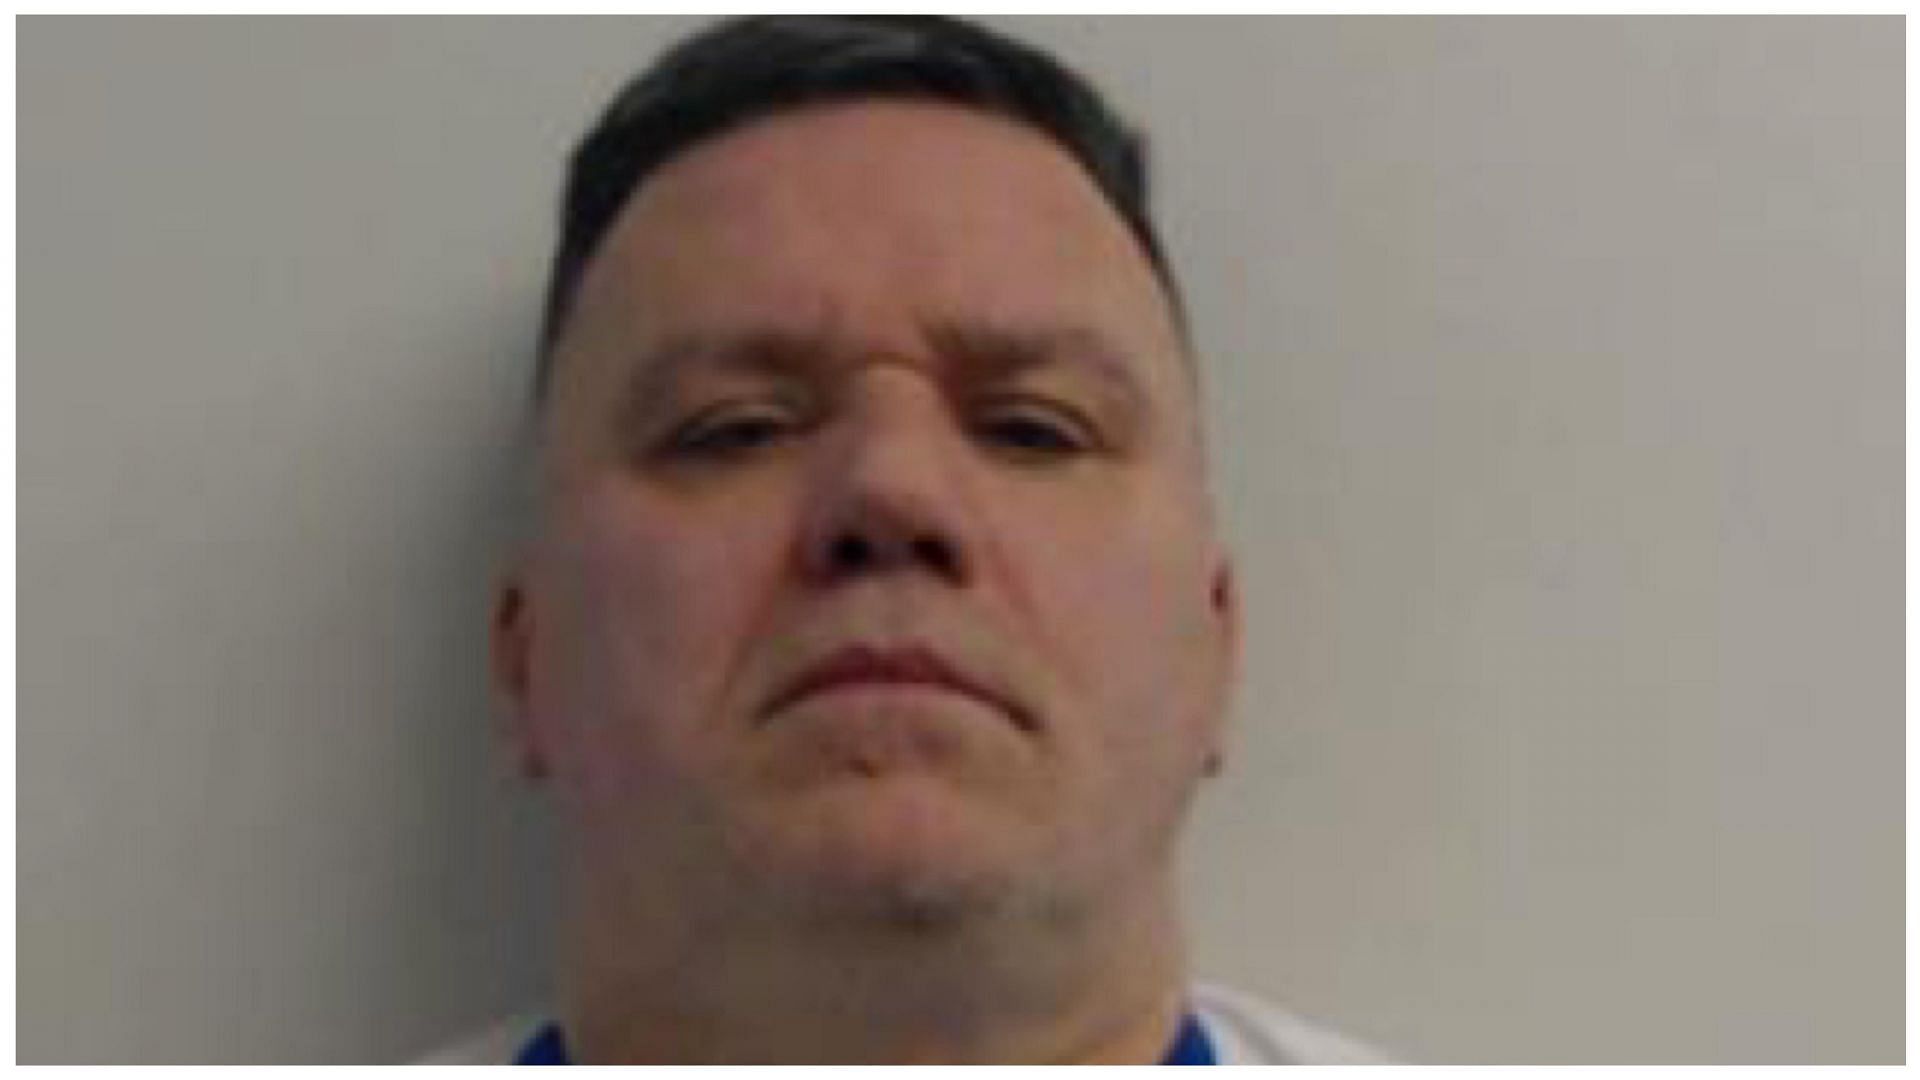 Iain Packer was convicted of the murder of Emma Caldwell on February 28 (Image via @PoliceScotland/X)